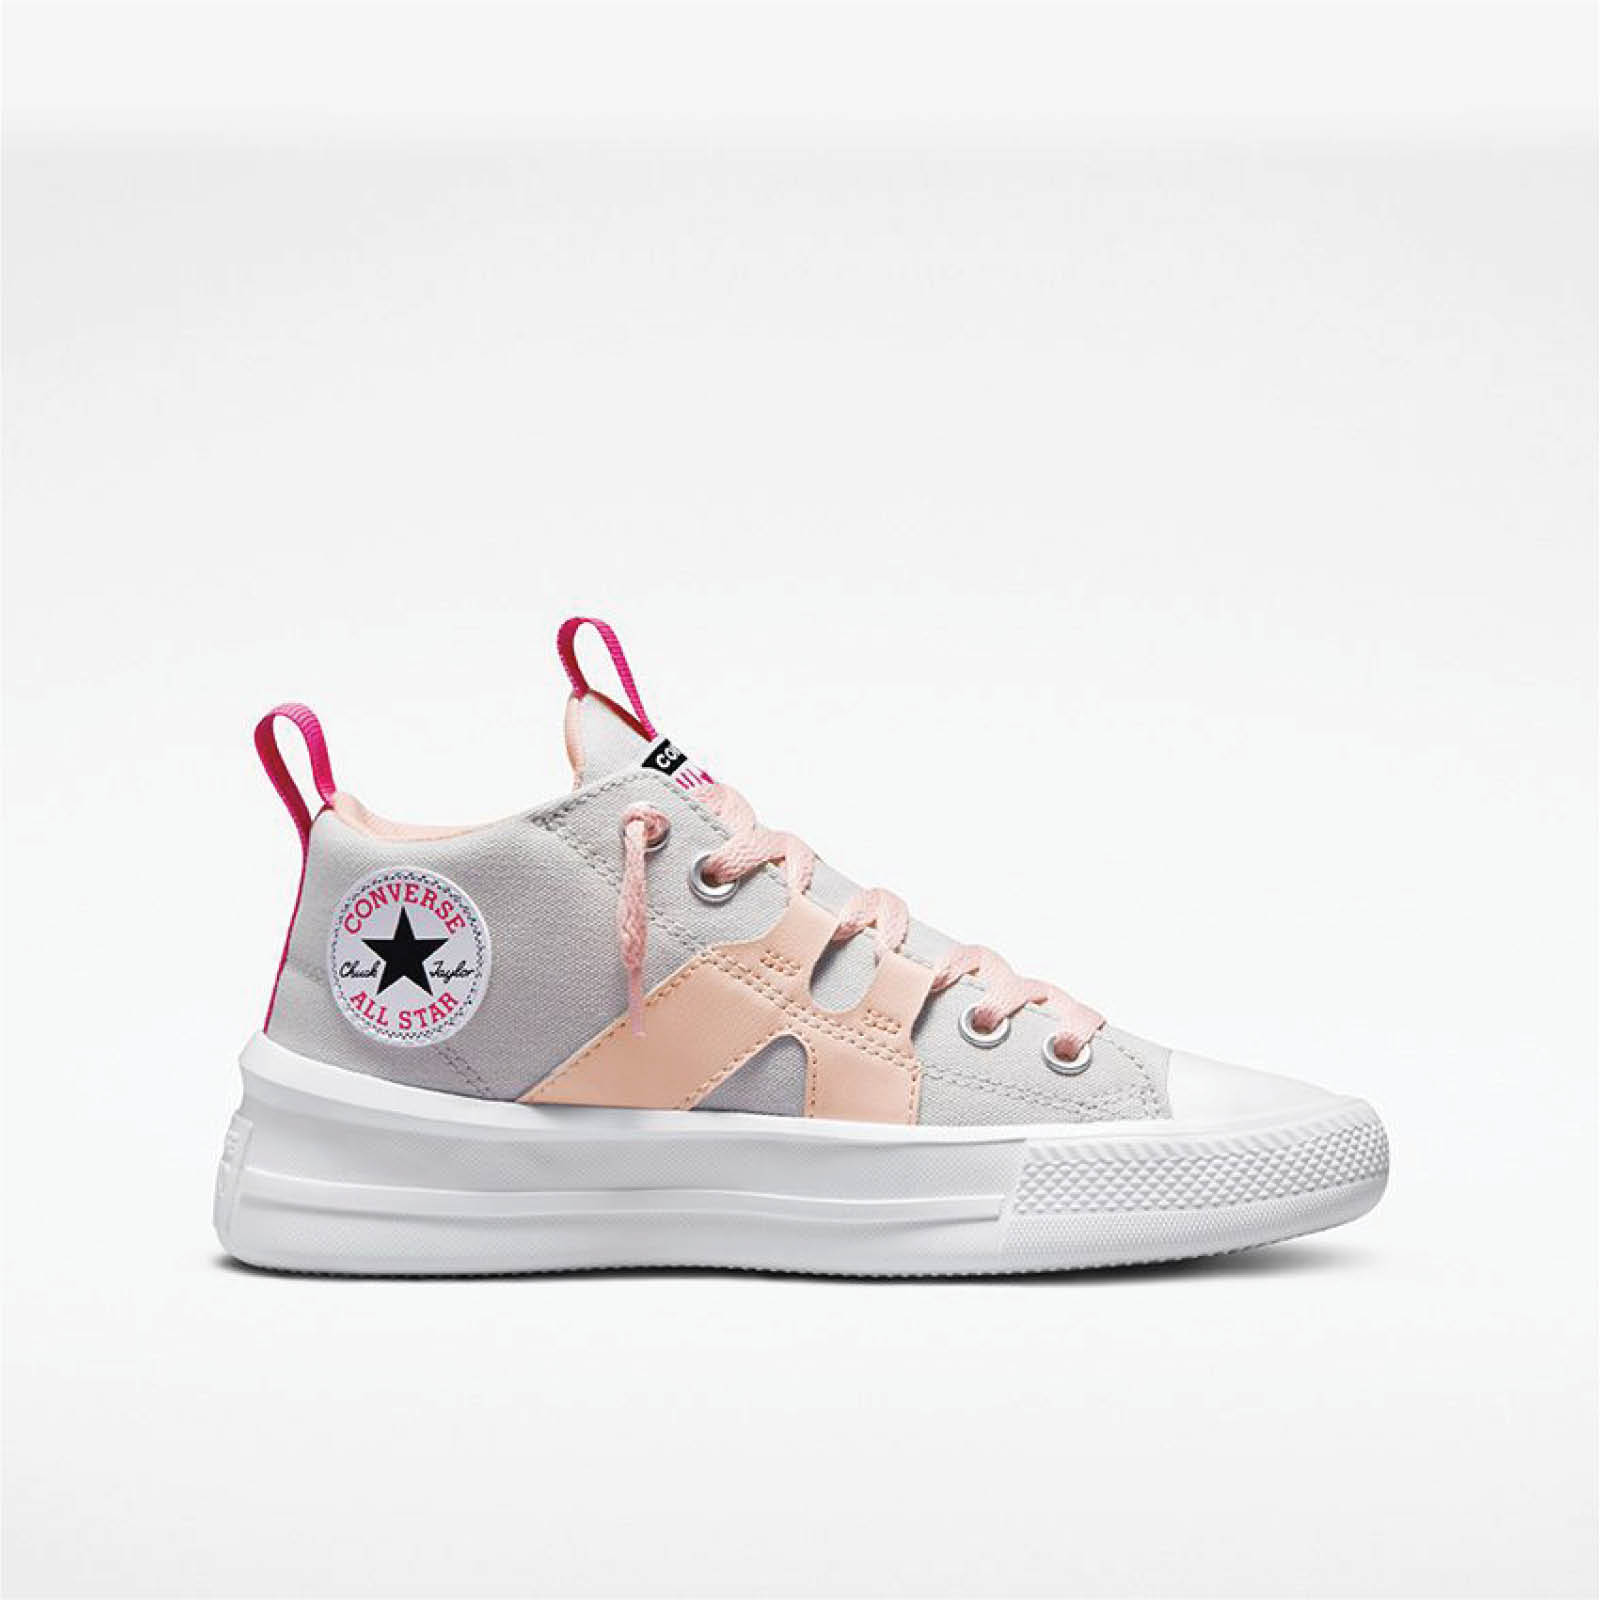 Converse - CHUCK TAYLOR ALL STAR ULTRA COLOR POP - 050-MOUSE/STORM PINK/PINK ZEST Παιδικά > Παπούτσια > Sneaker > Παπούτσι Mid Cut